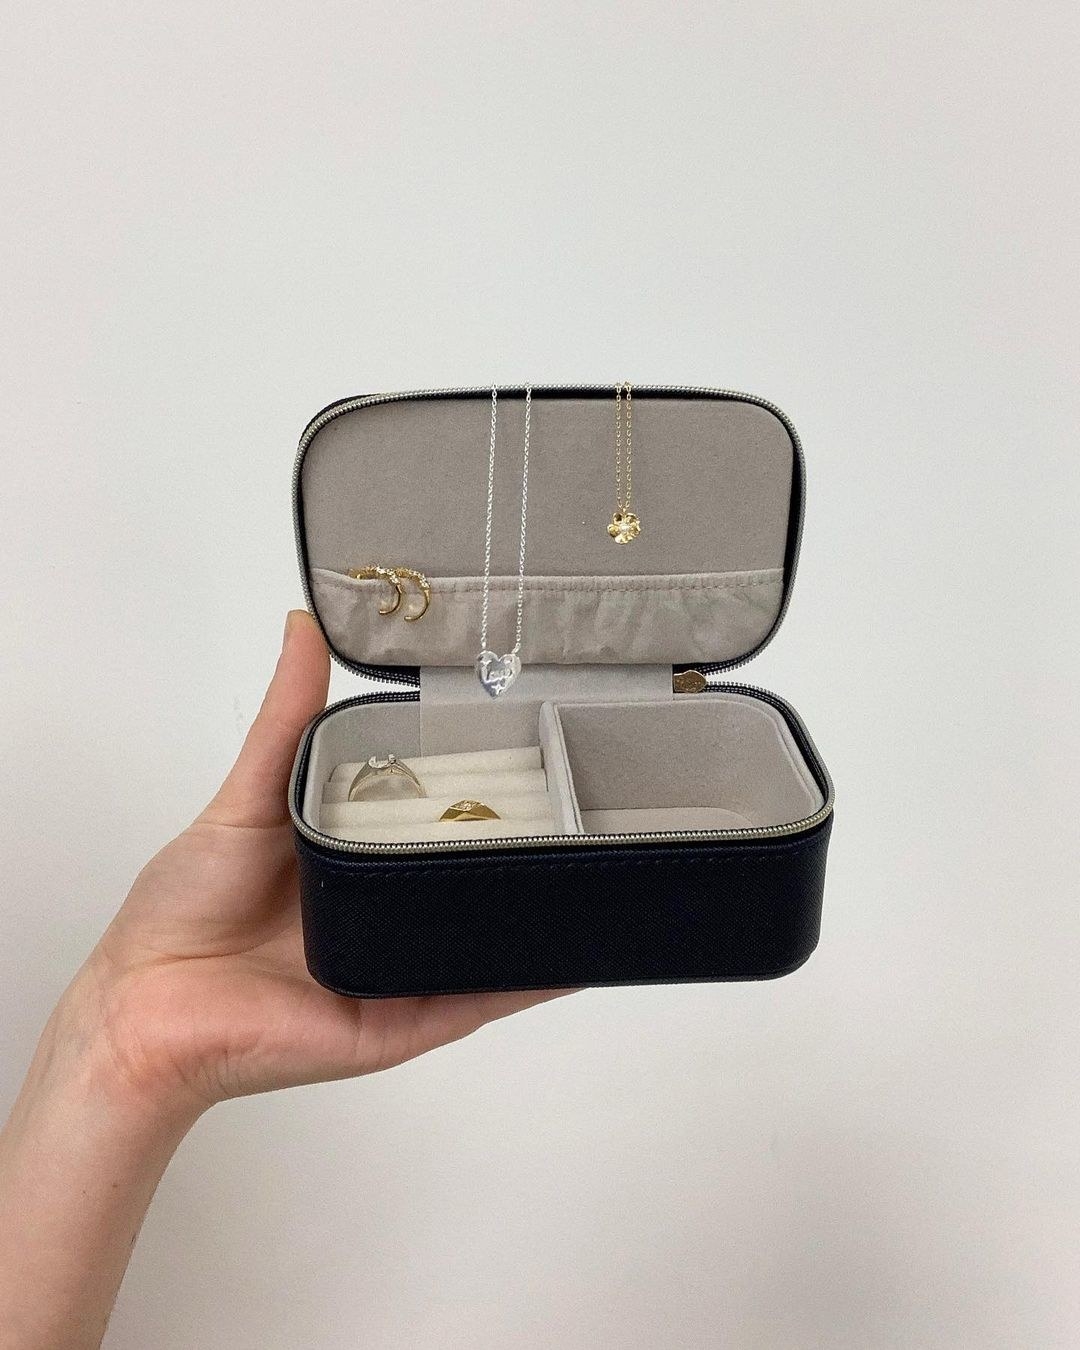 A person holding up a small rectangular jewellery case